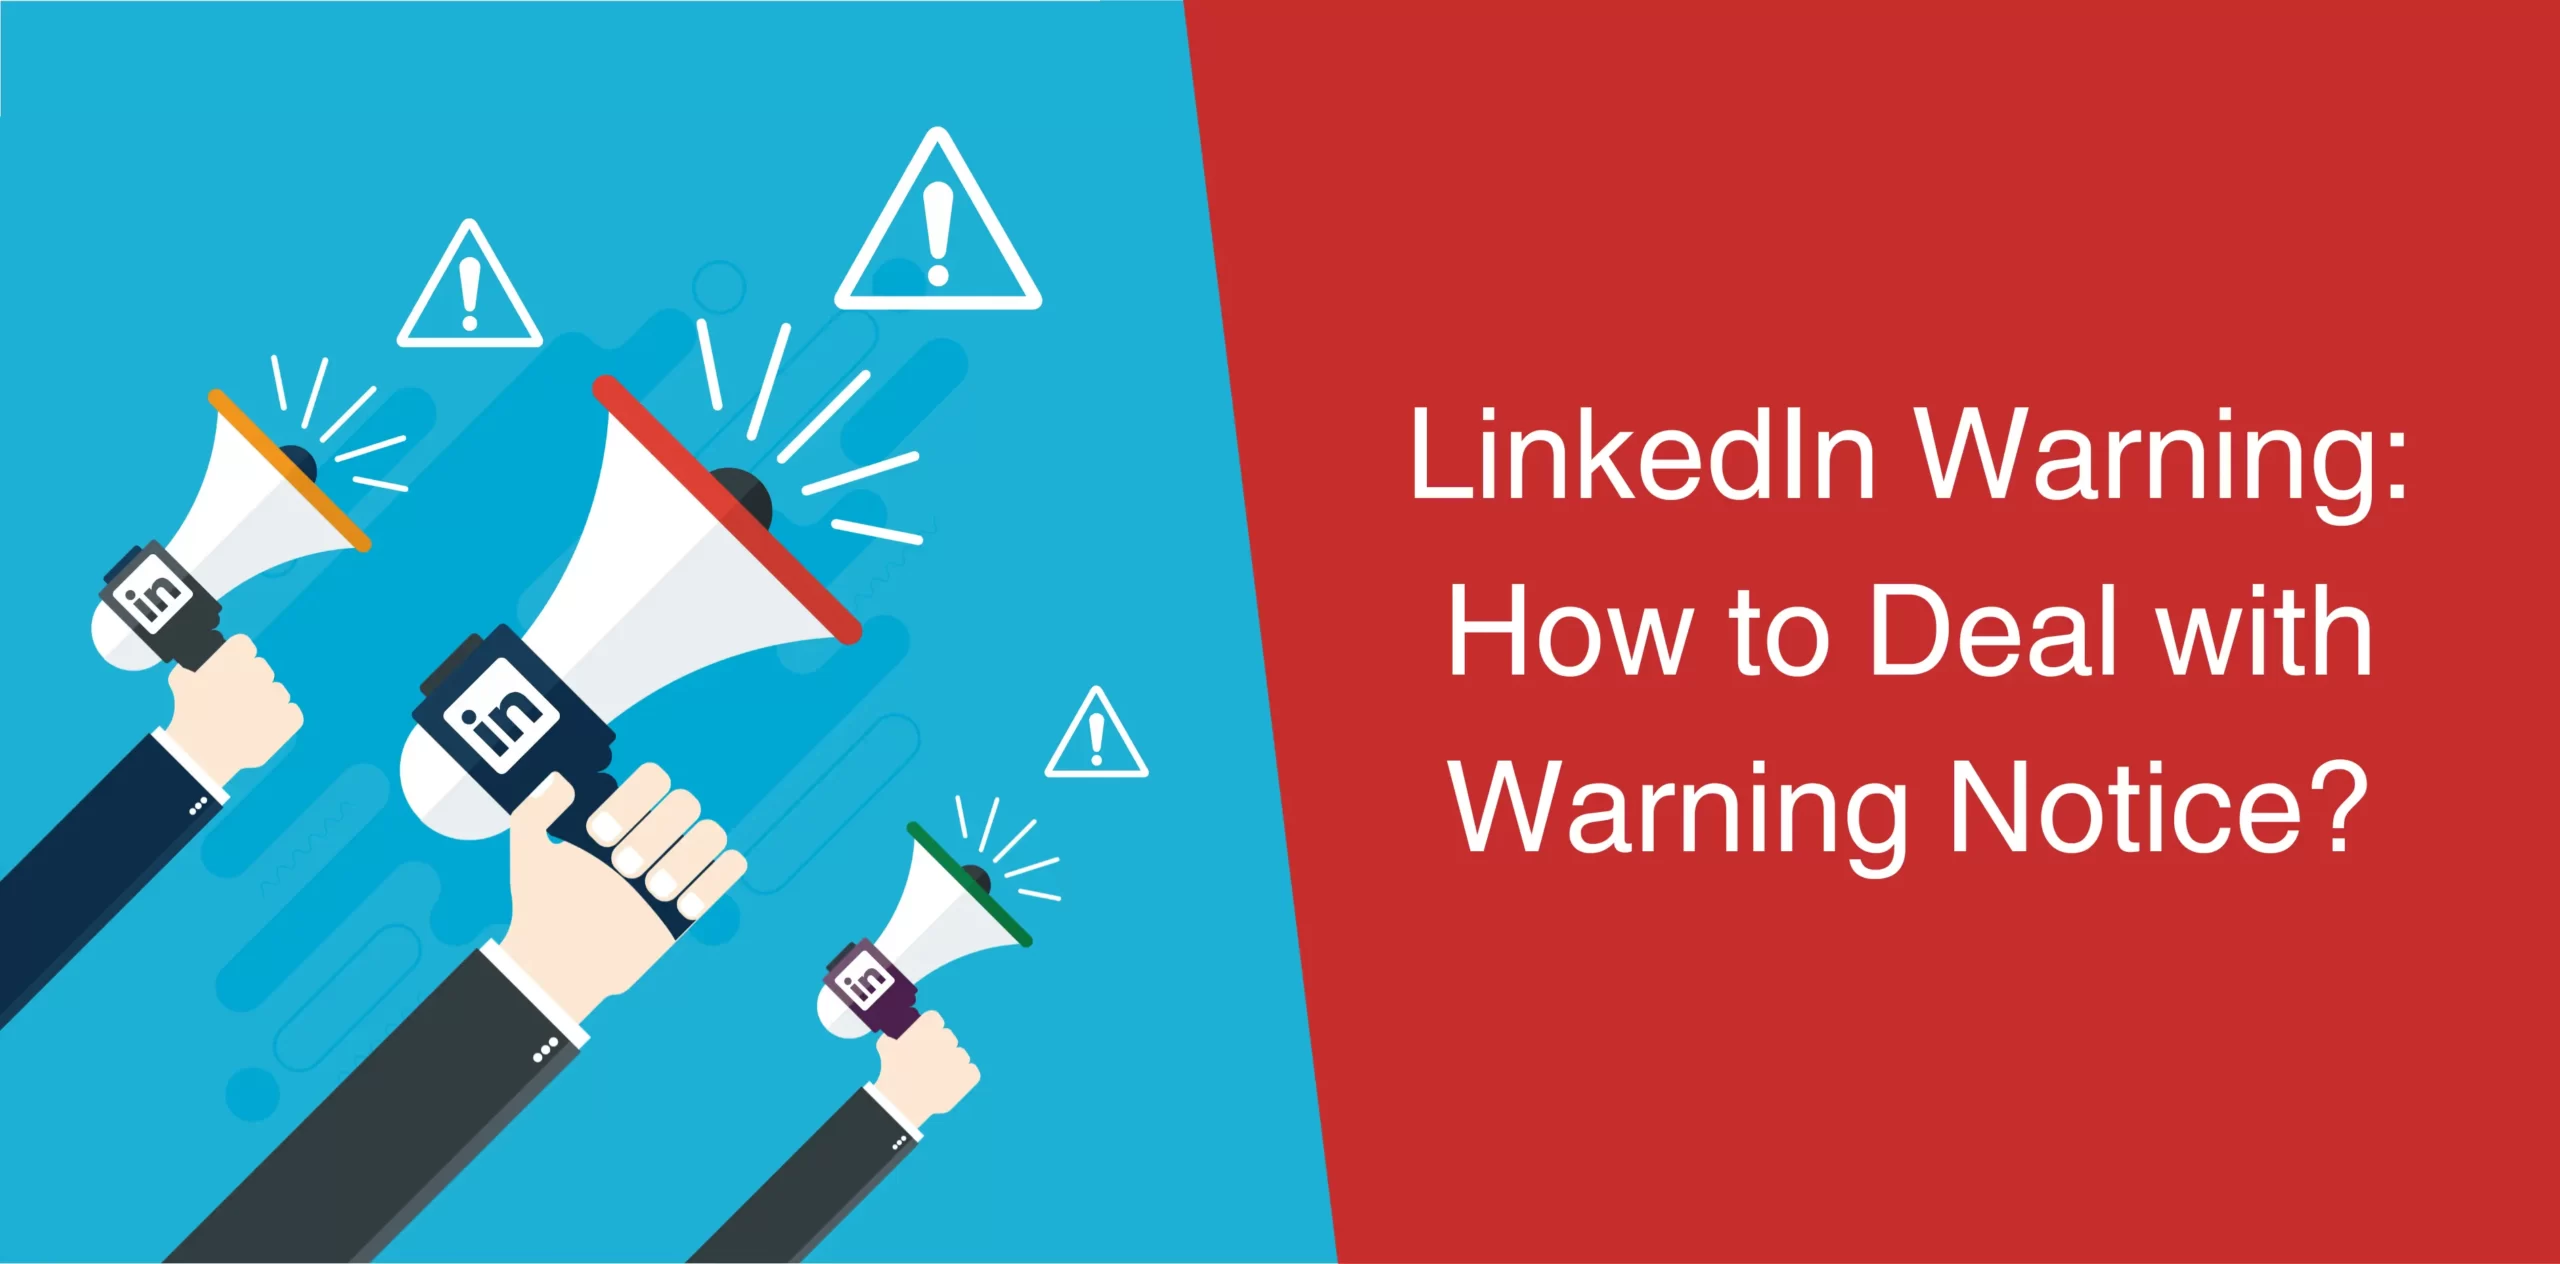 Thumbnail-LinkedIn-Warning-How-to-Deal-With-Warning-Notice